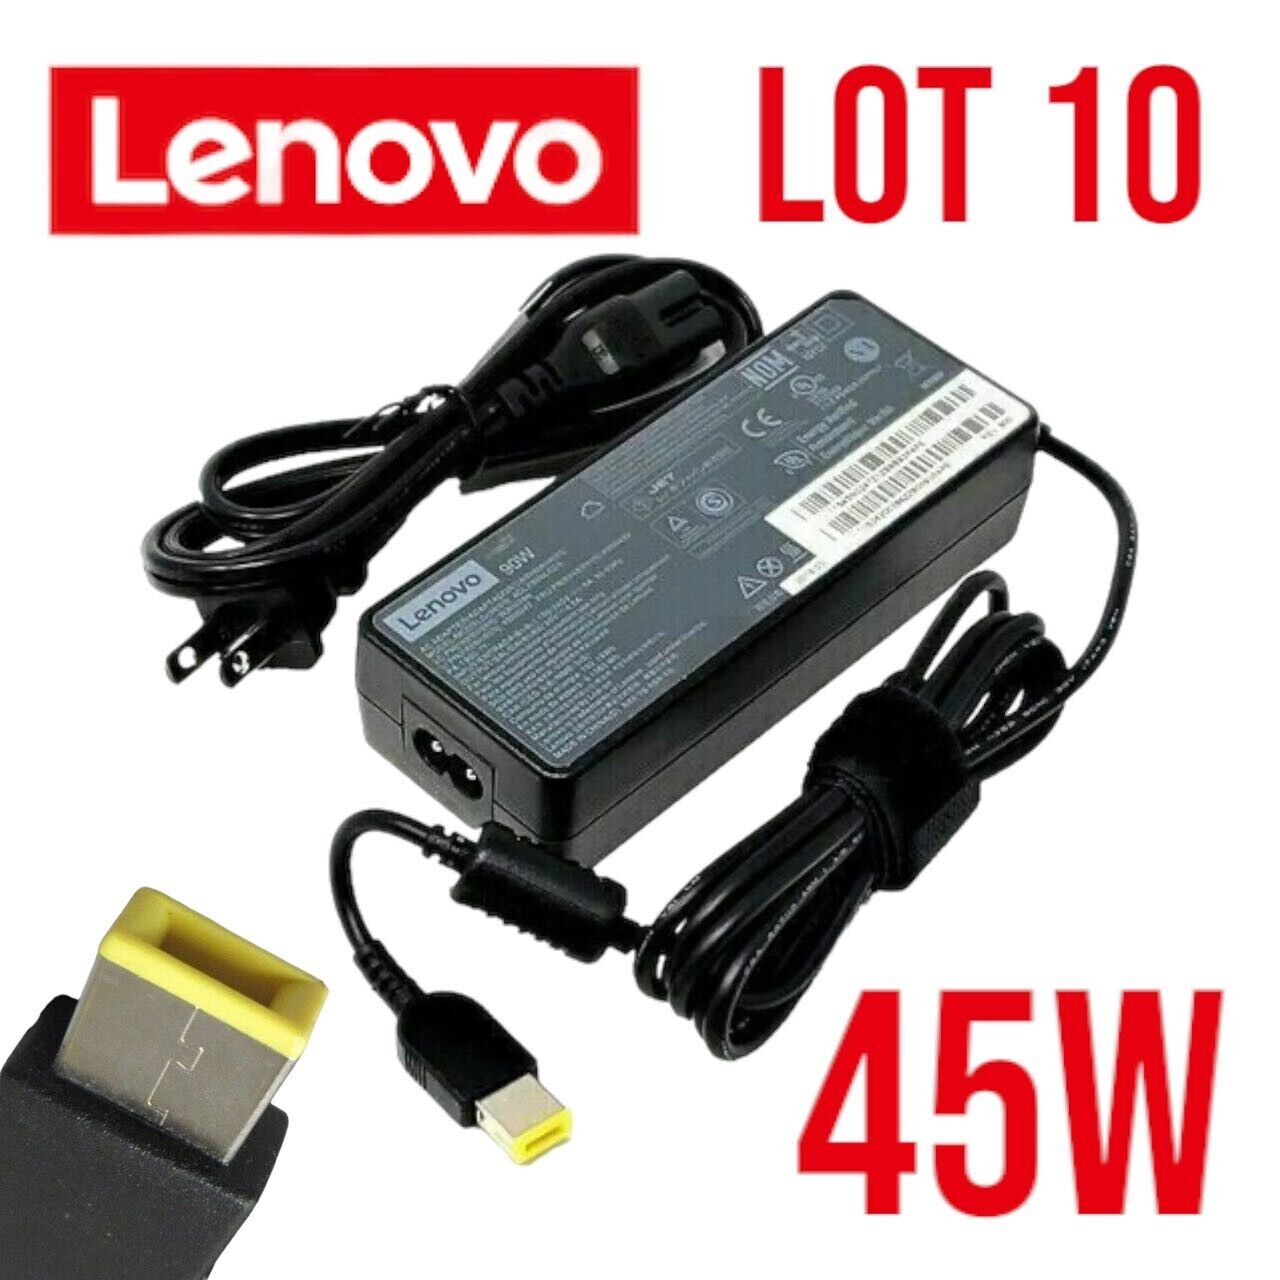 LOT 10 OEM Lenovo ThinkPad Laptop AC Charger Power Adapter 45W 20V 2.25A SQUARE